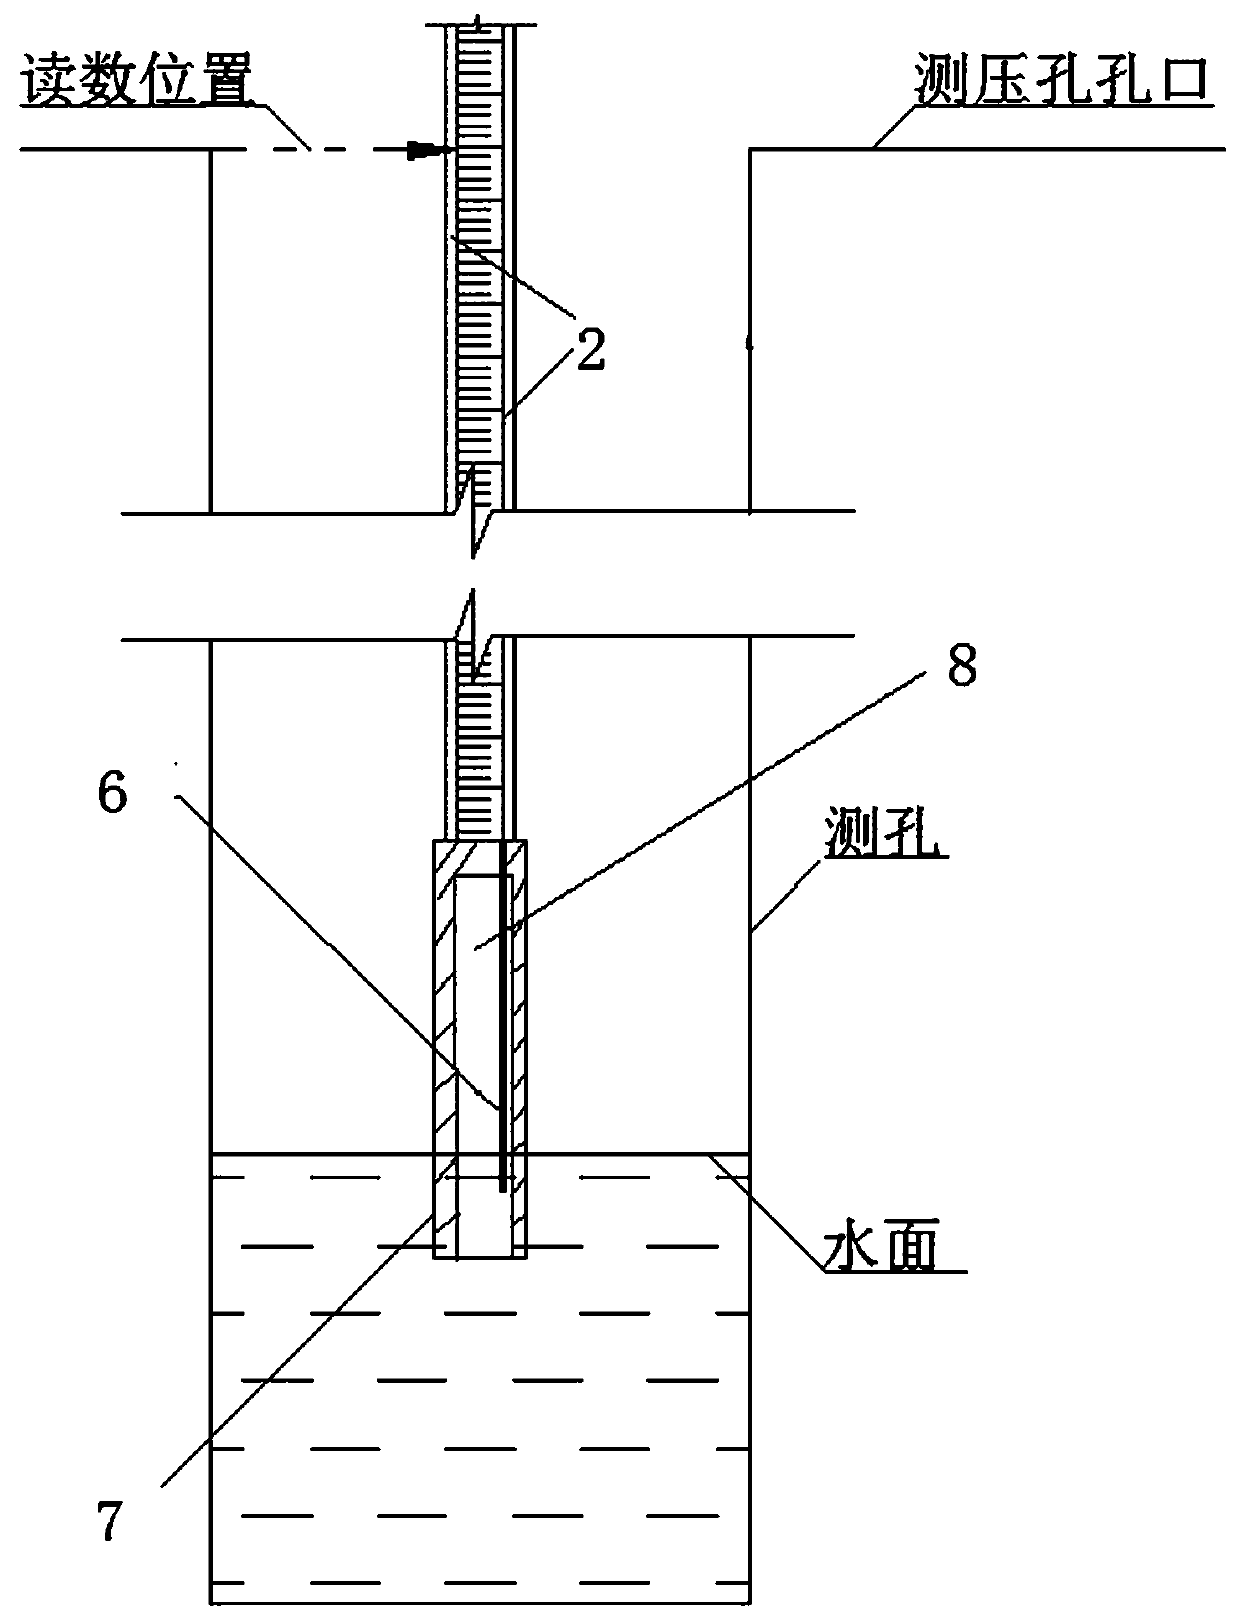 Portable depth measuring device for water level of dam